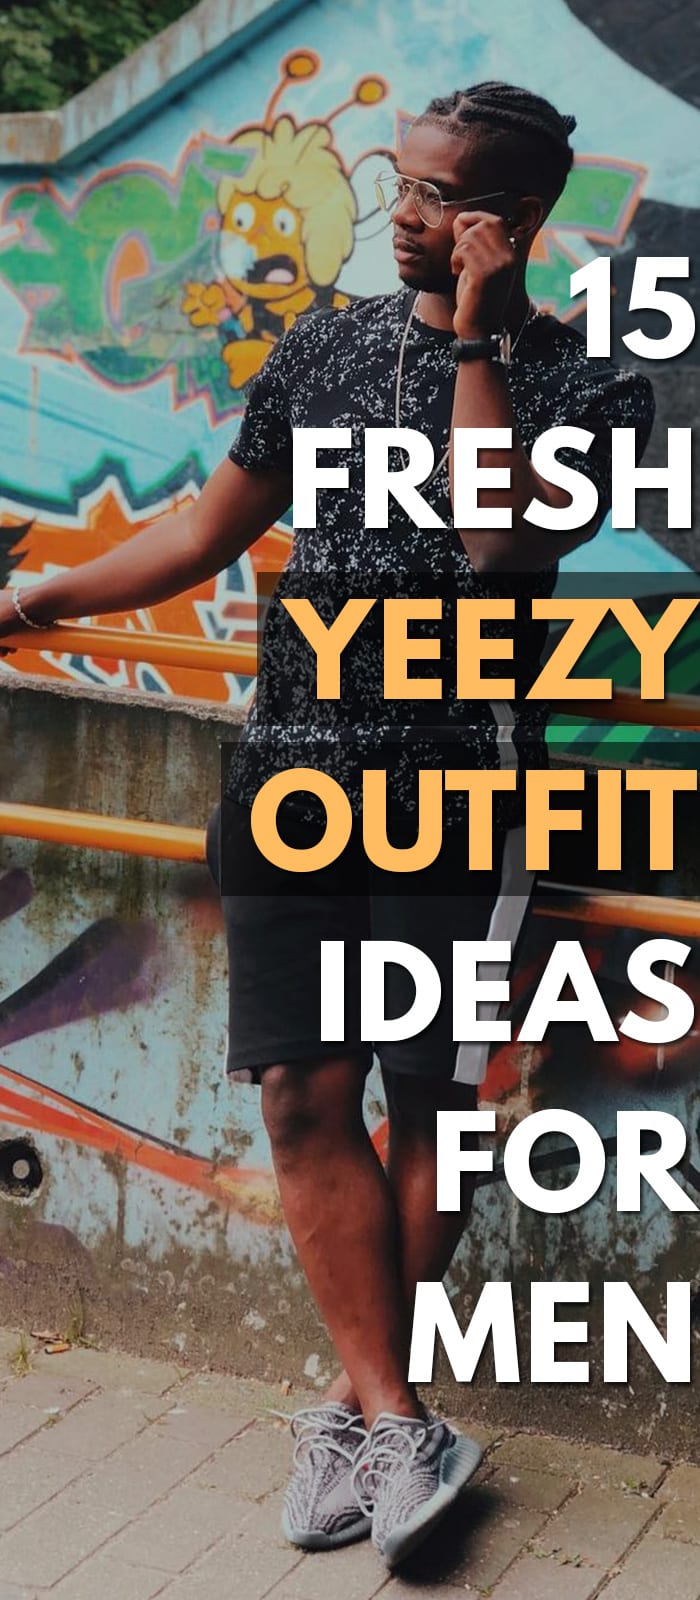 15 Fresh Yeezy Outfit Ideas For Men.